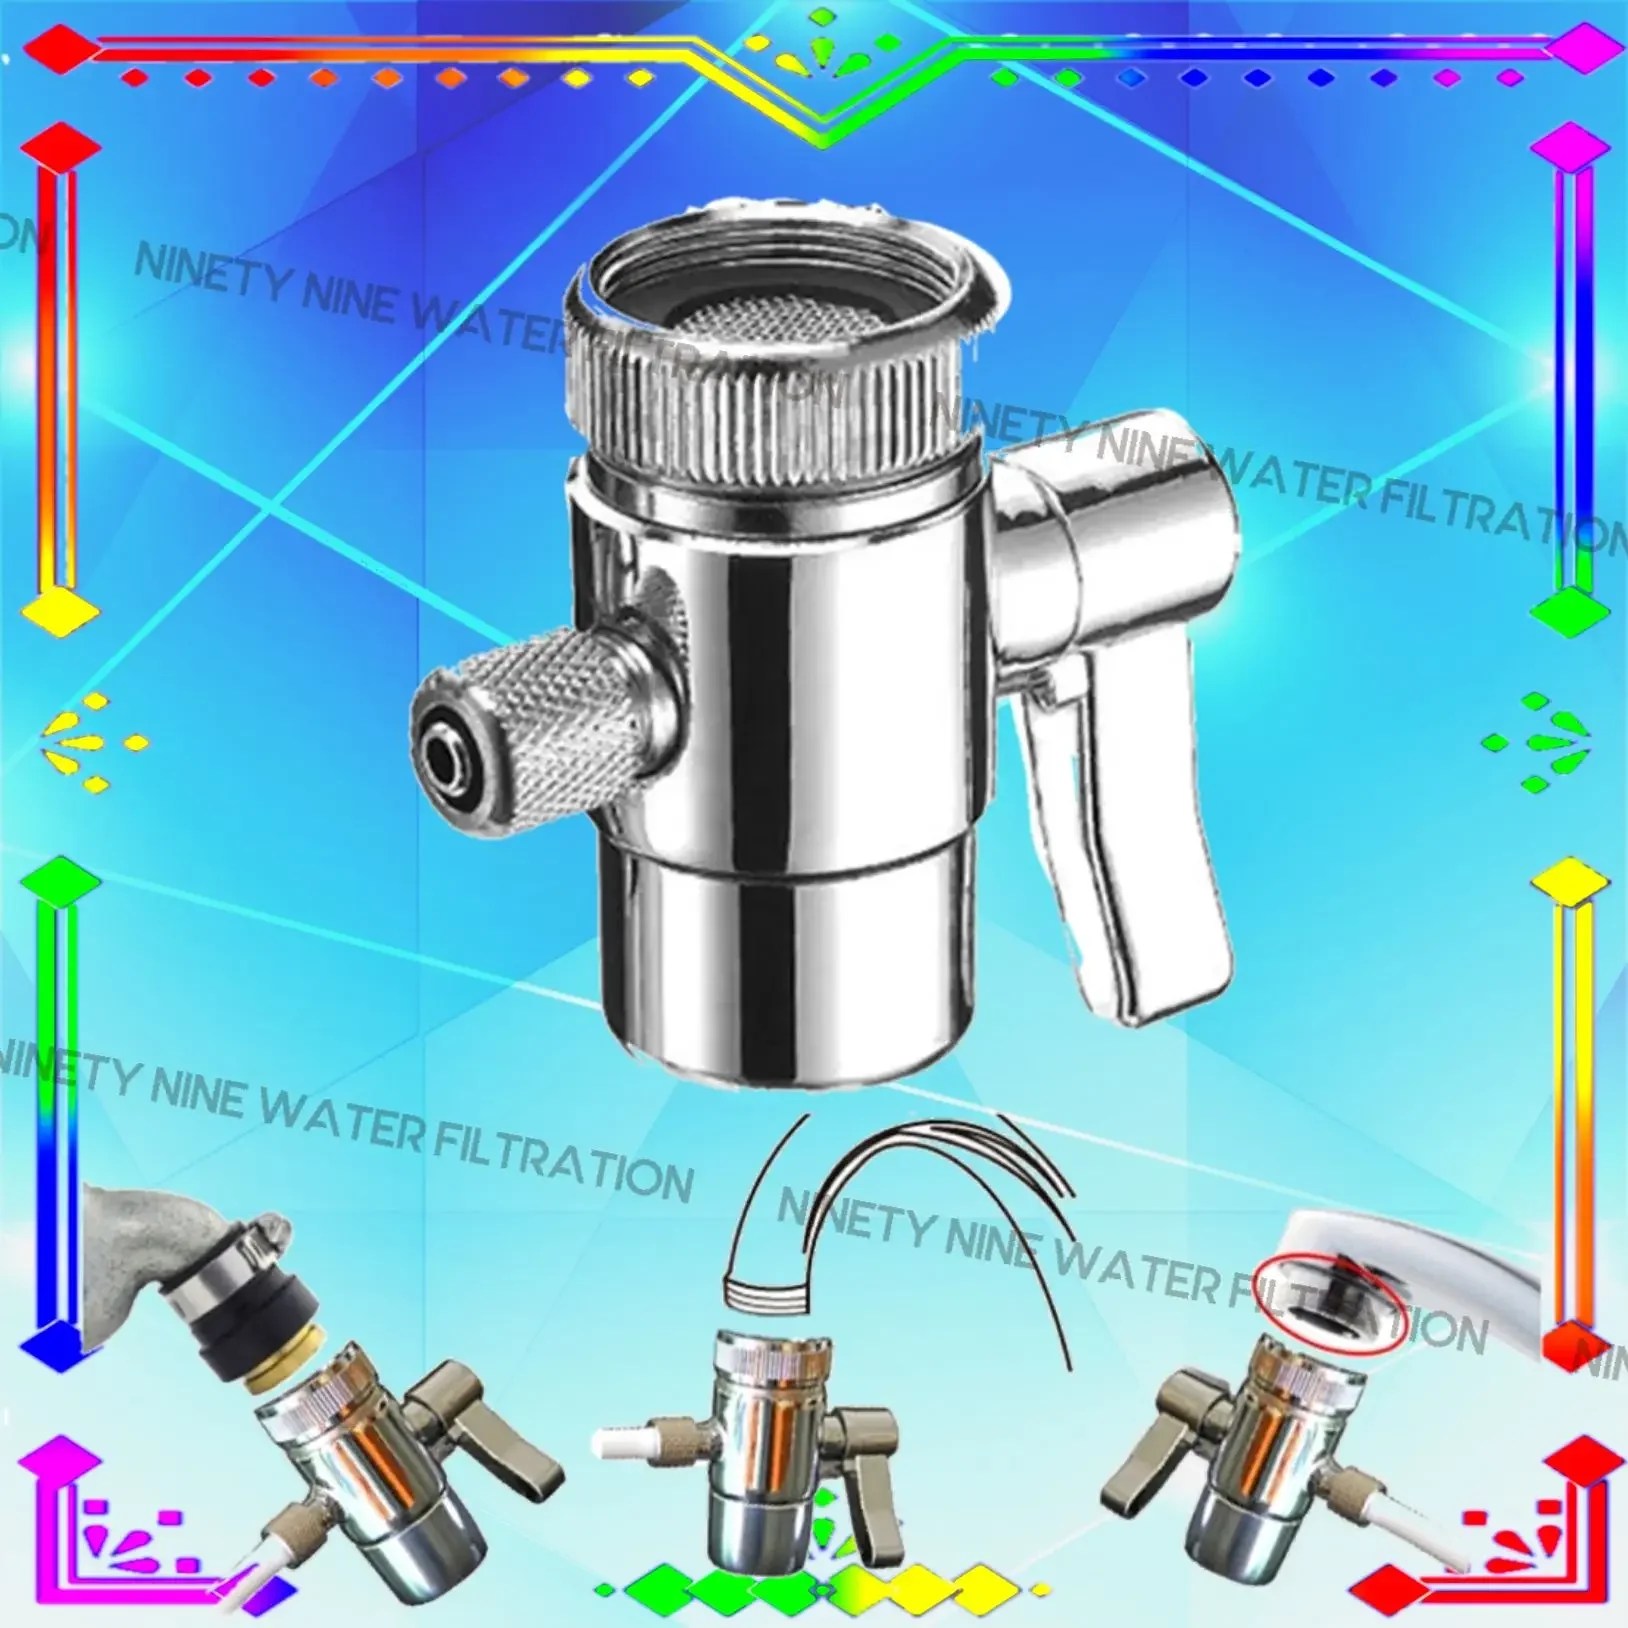 Standard One Way Diverter Valve For Water Filter Purifiers For 1/4" Tube